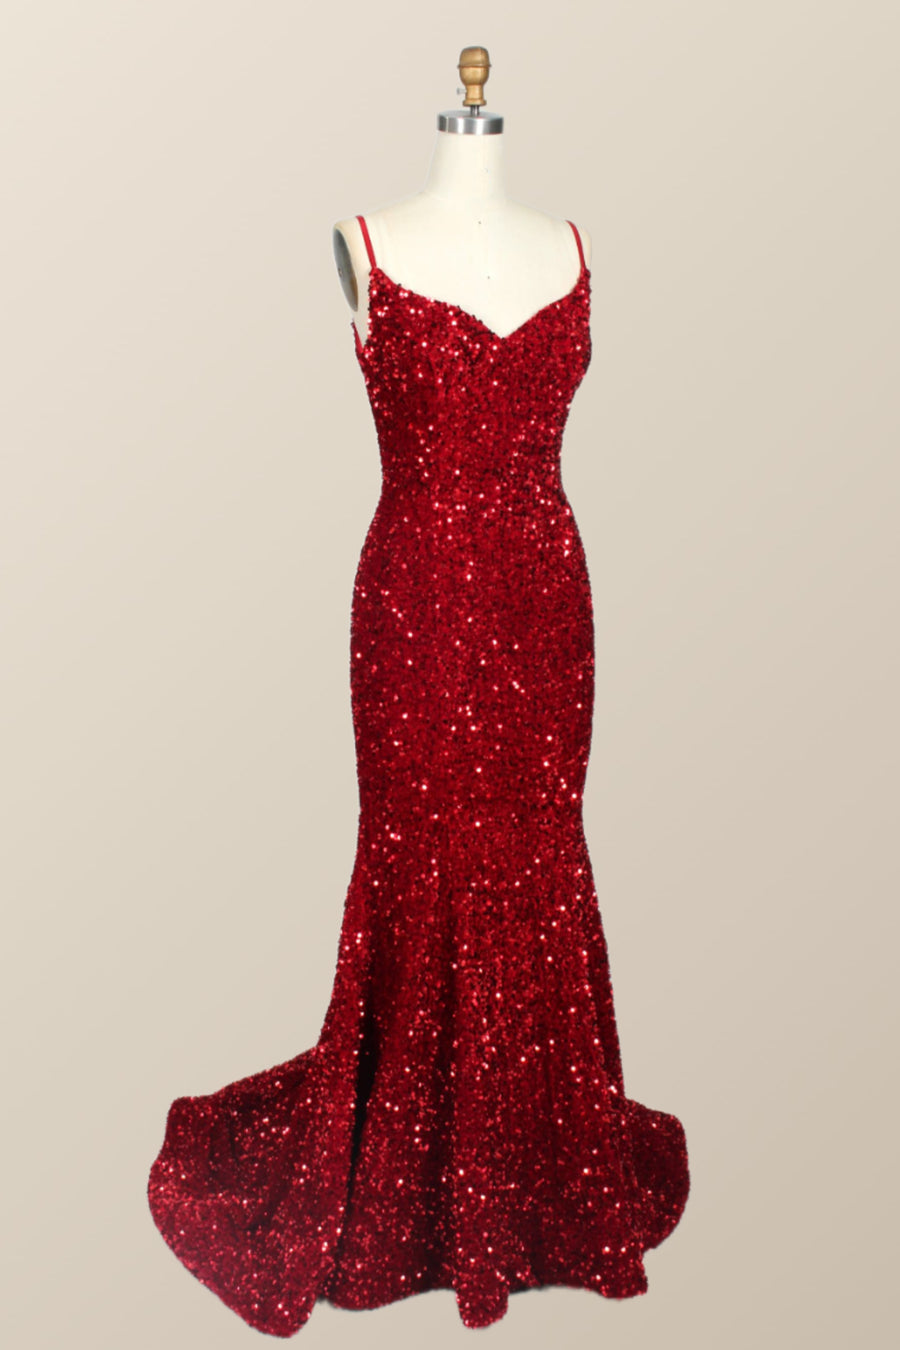 Straps Red Sequin Mermaid Long Party Dress